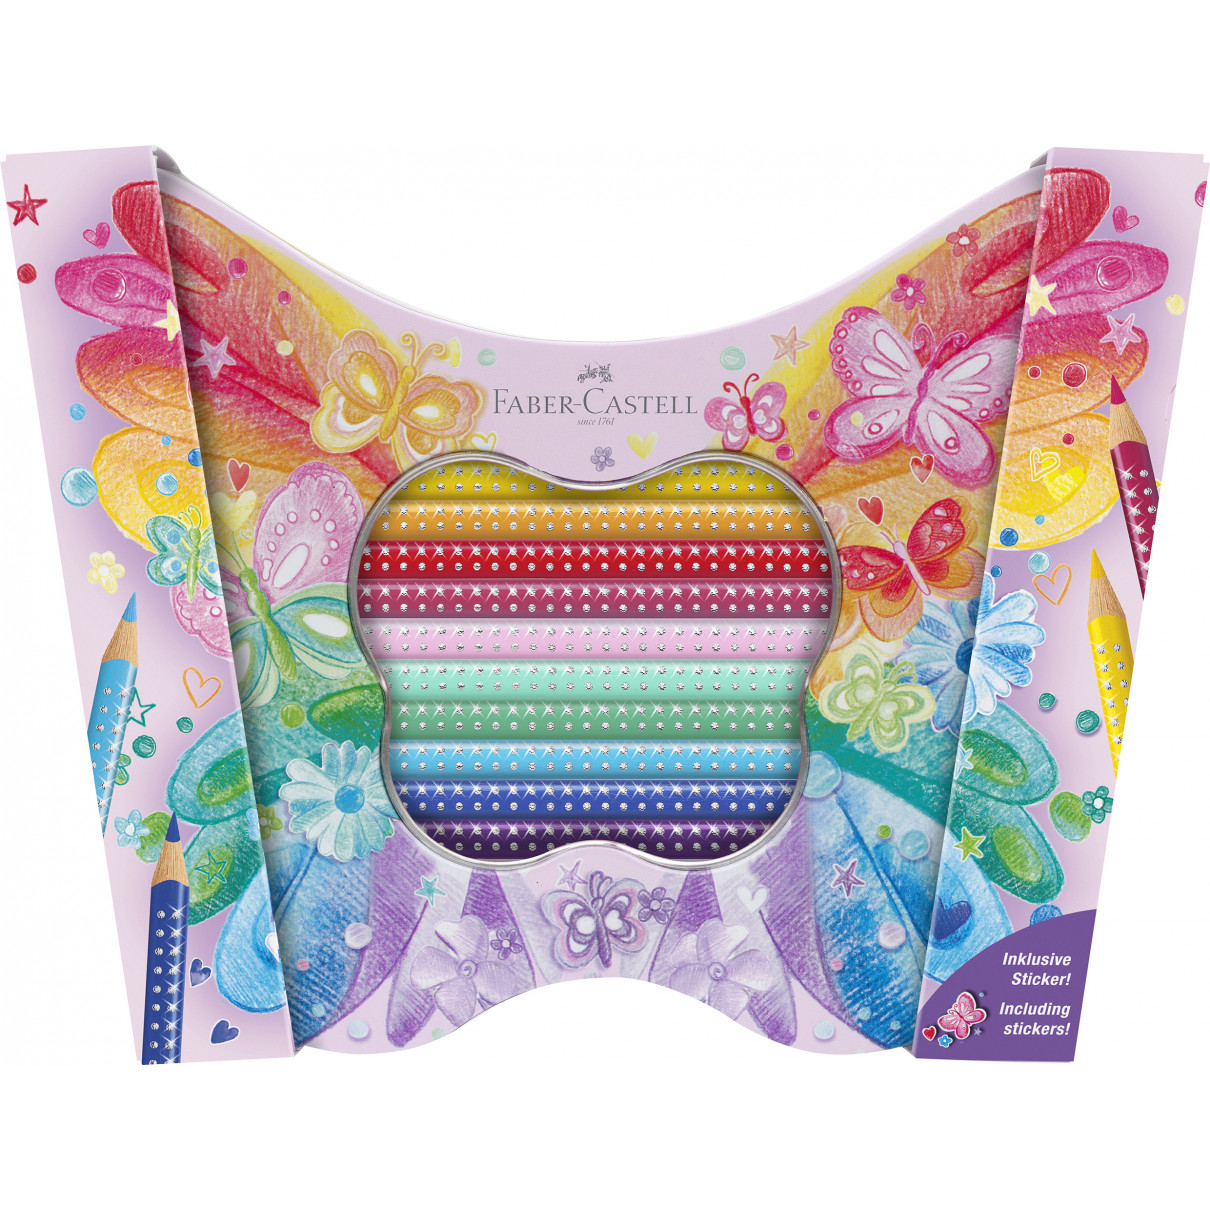 Faber-Castell Sparkle Colour Pencil Gift Set - Butterfly